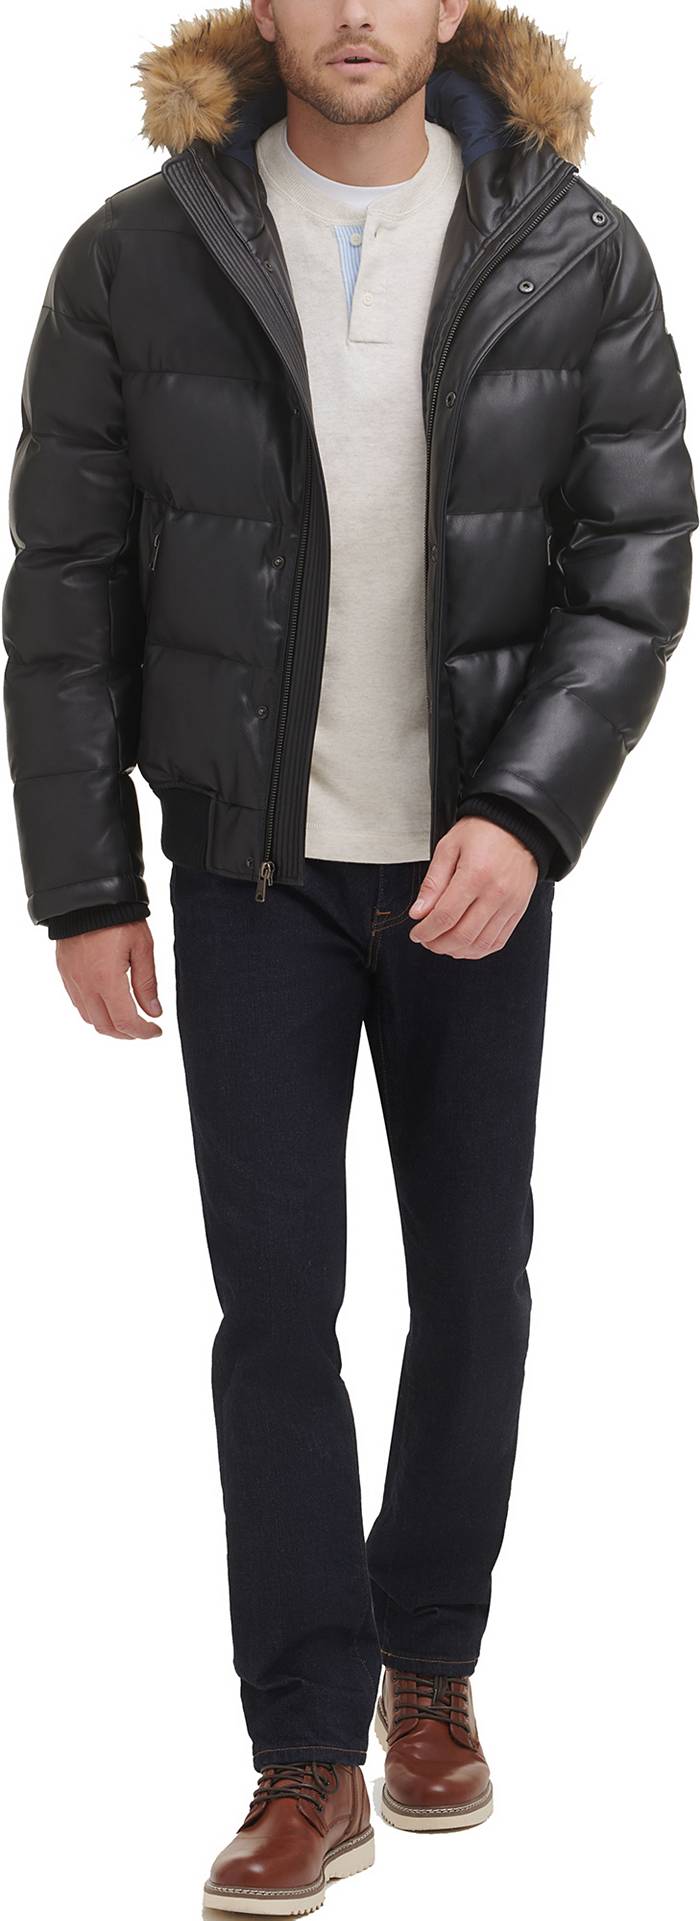 Tommy Hilfiger Men's Faux Leather Quilted Snorkel Bomber Jacket with Faux Hood | Dick's Sporting Goods